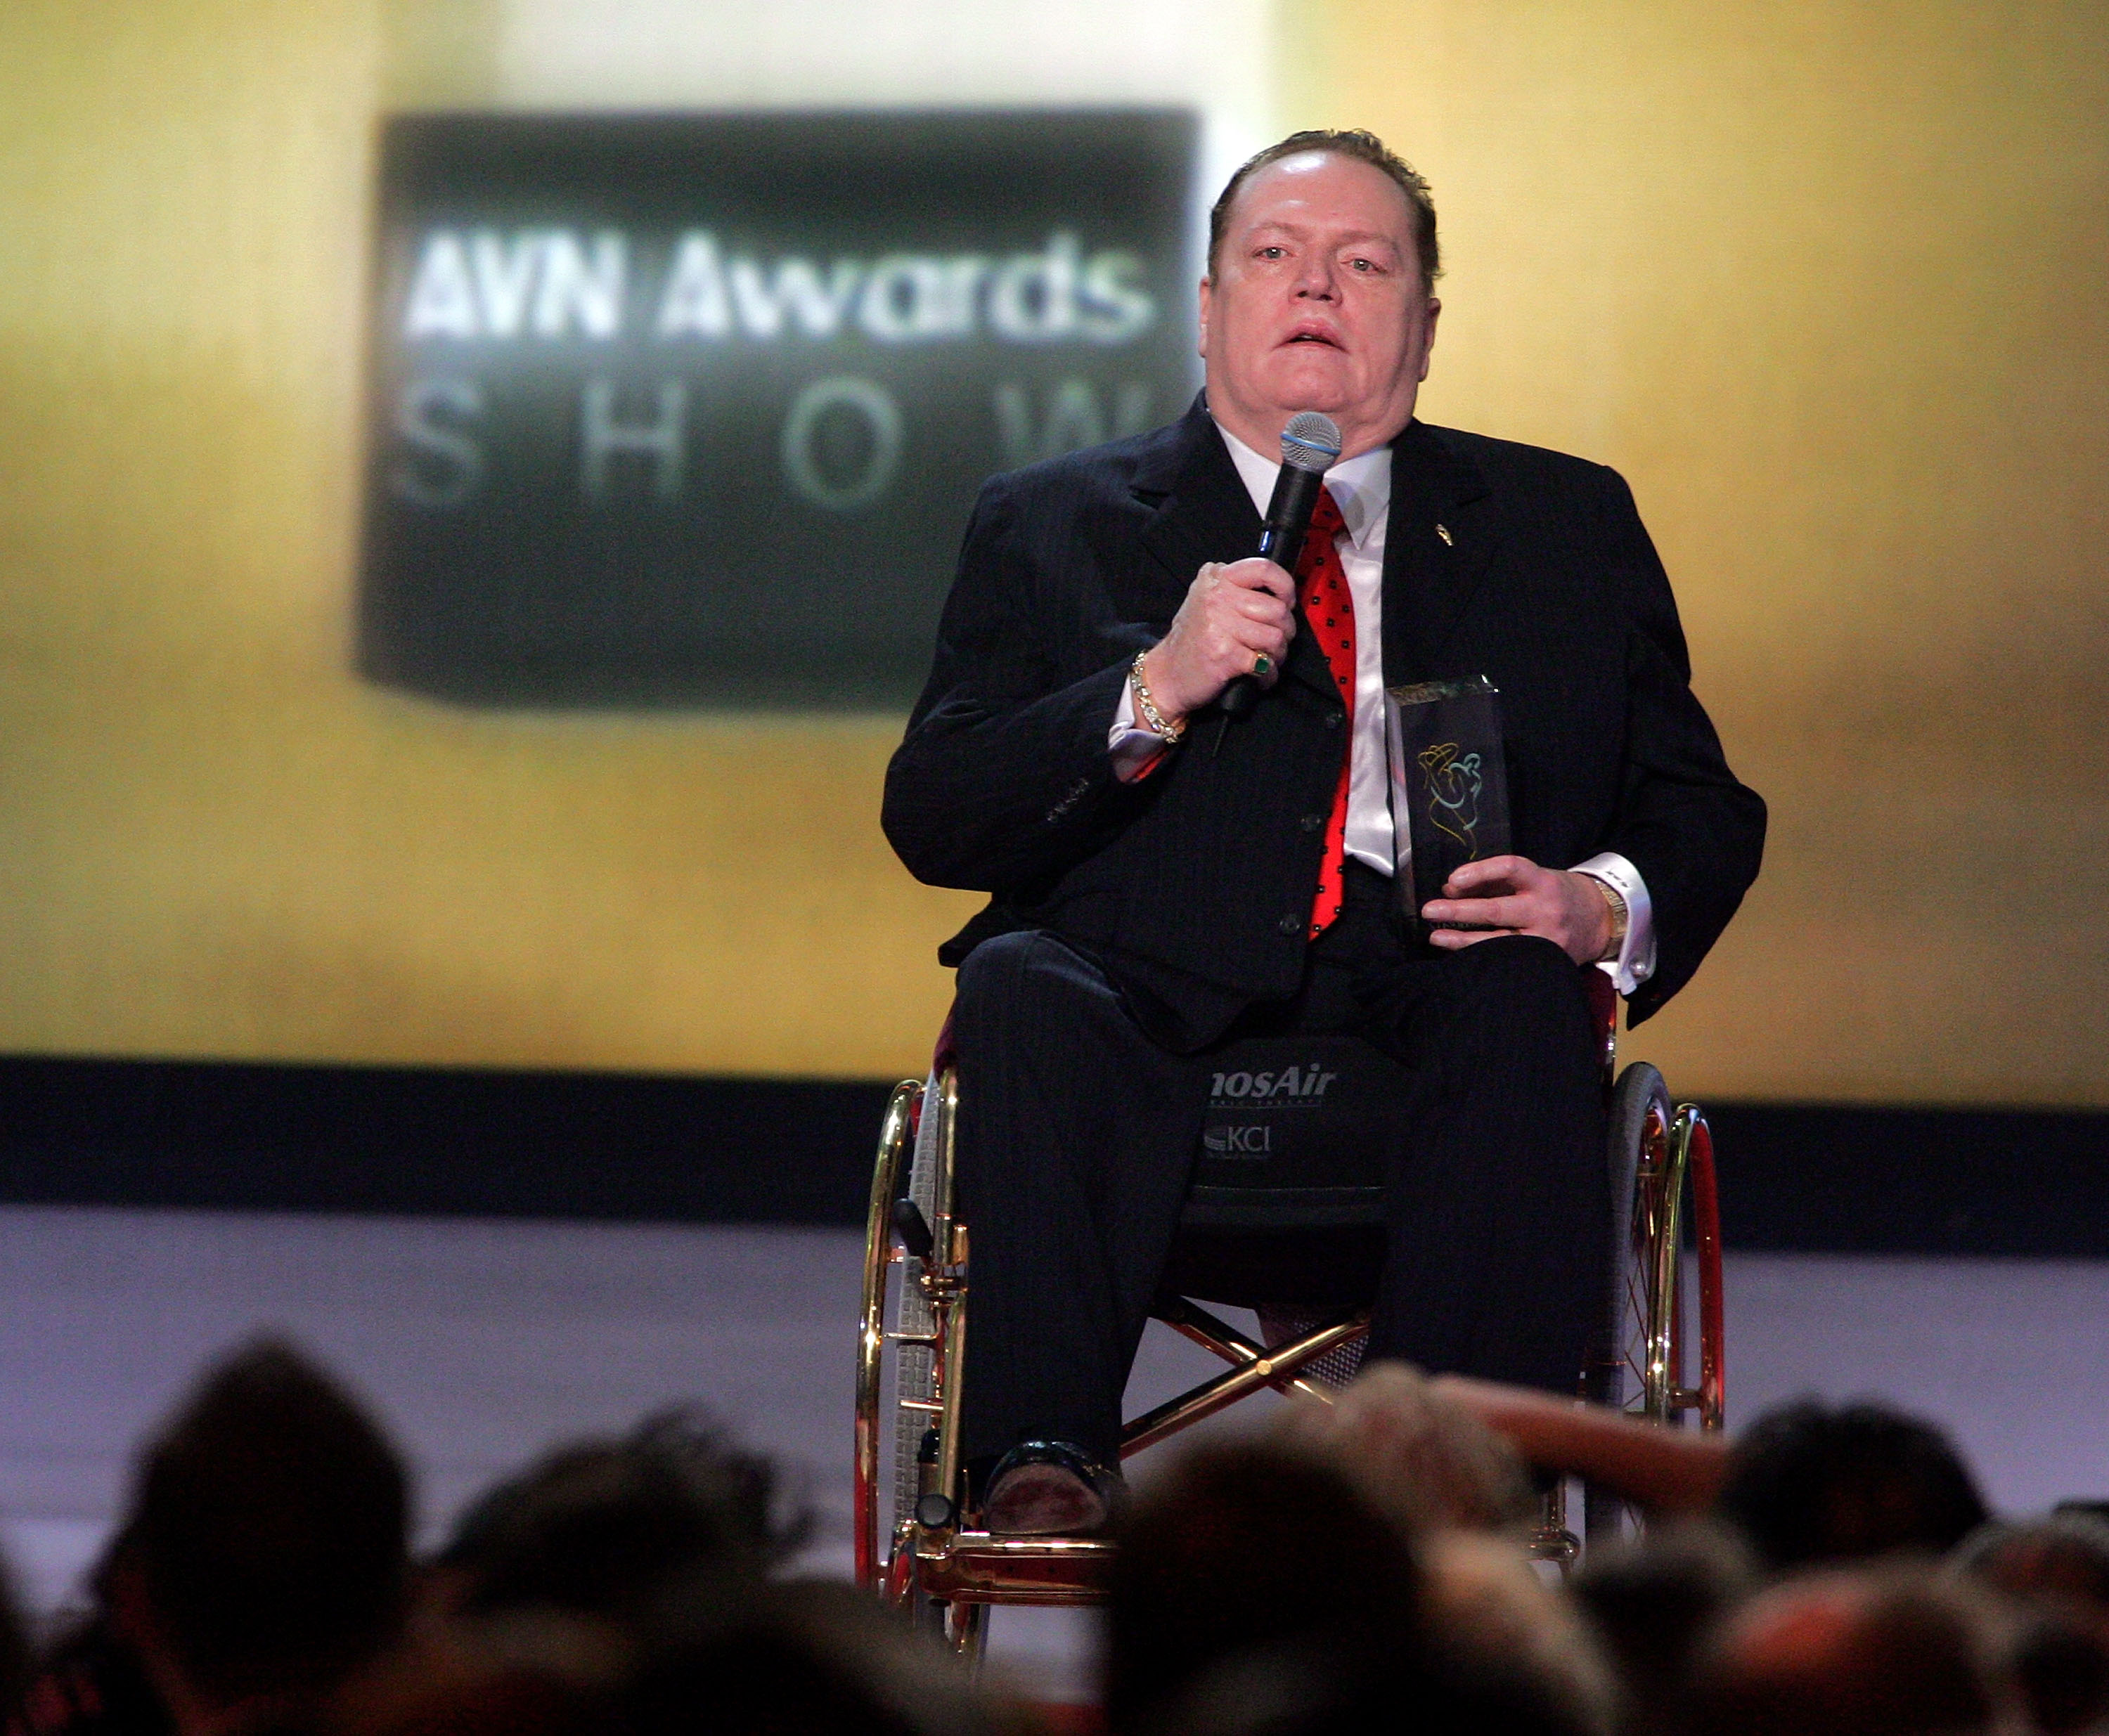 Larry Flynt during the Adult Video News Awards Show at the Venetian Resort Hotel and Casino January 7, 2006. | Source: Getty Images